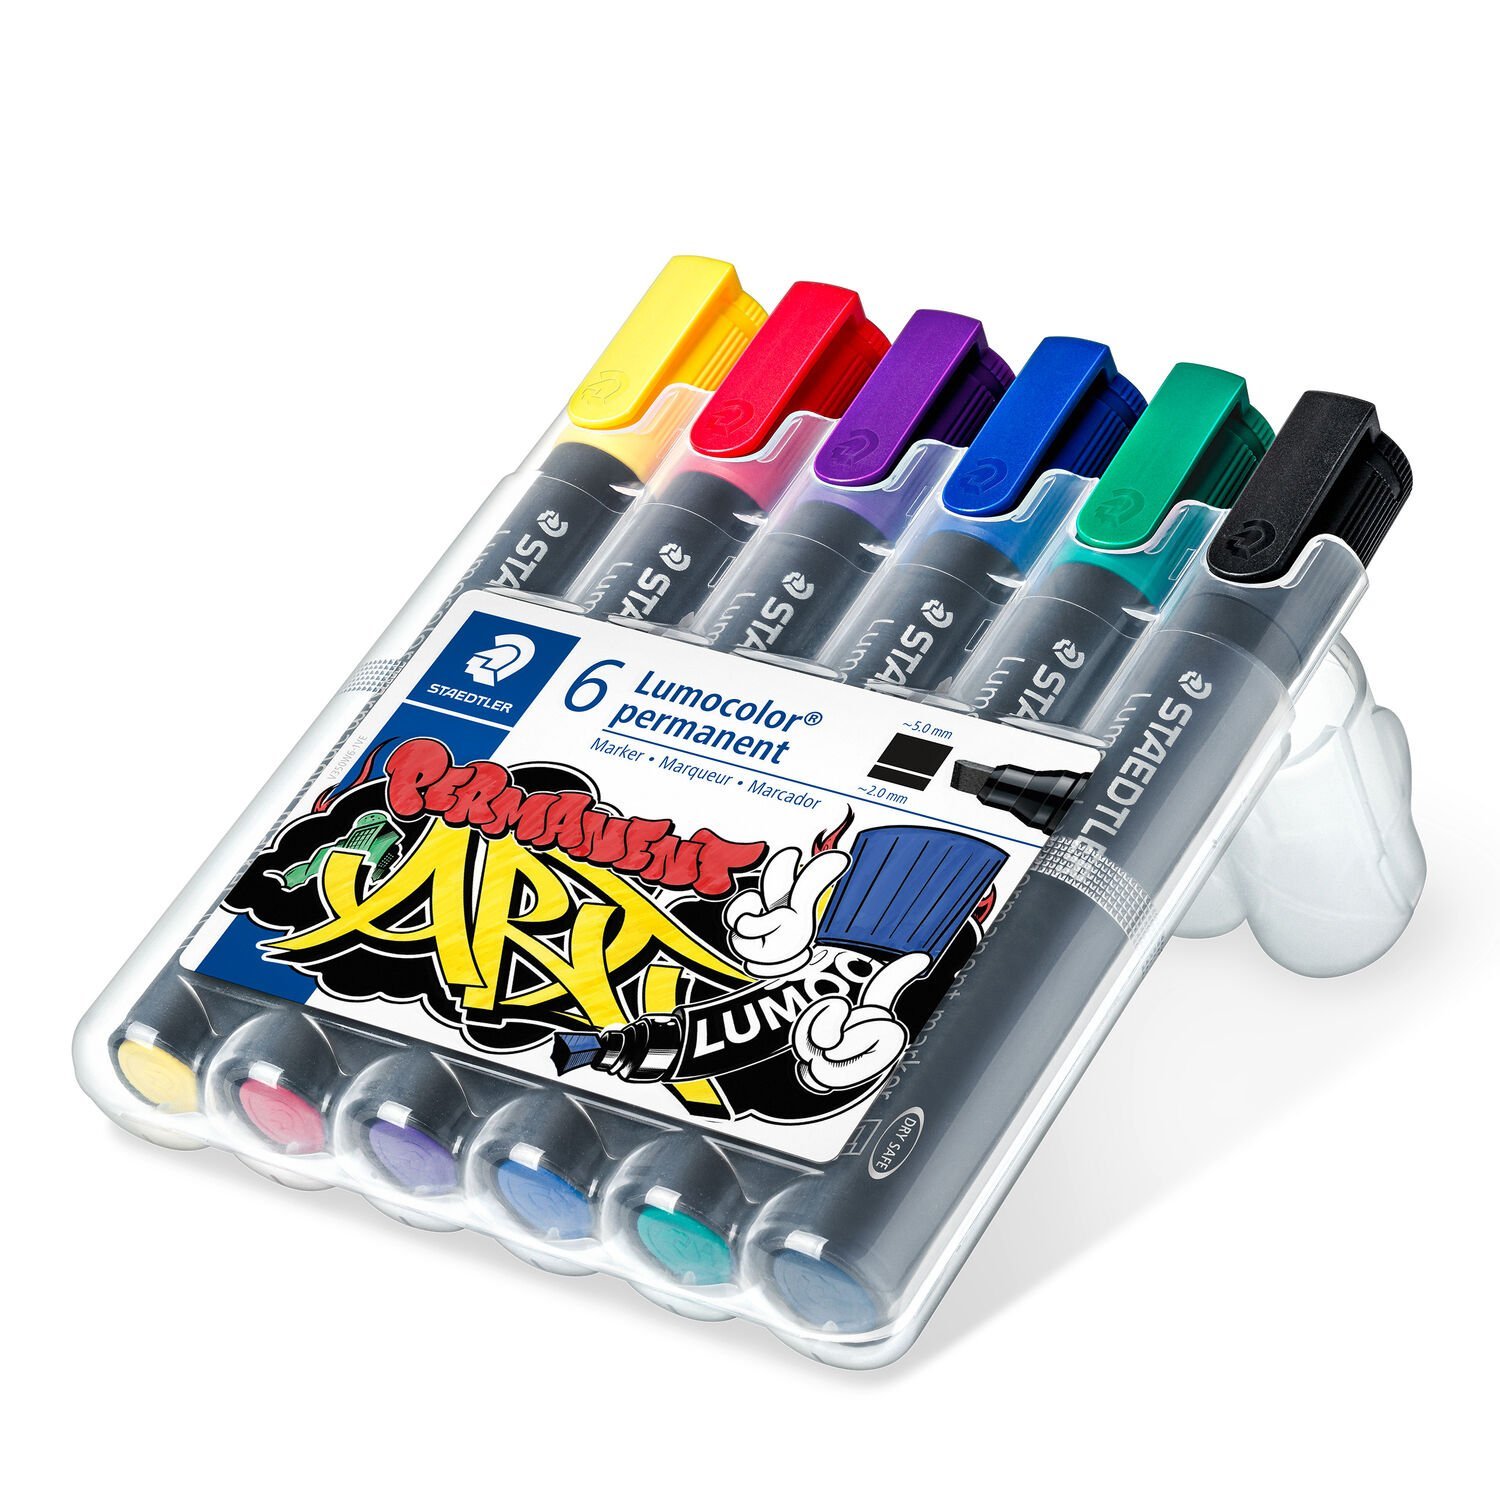 STAEDTLER box "Lumocolor ART" containing 6 Lumocolor permanent marker in assorted colours